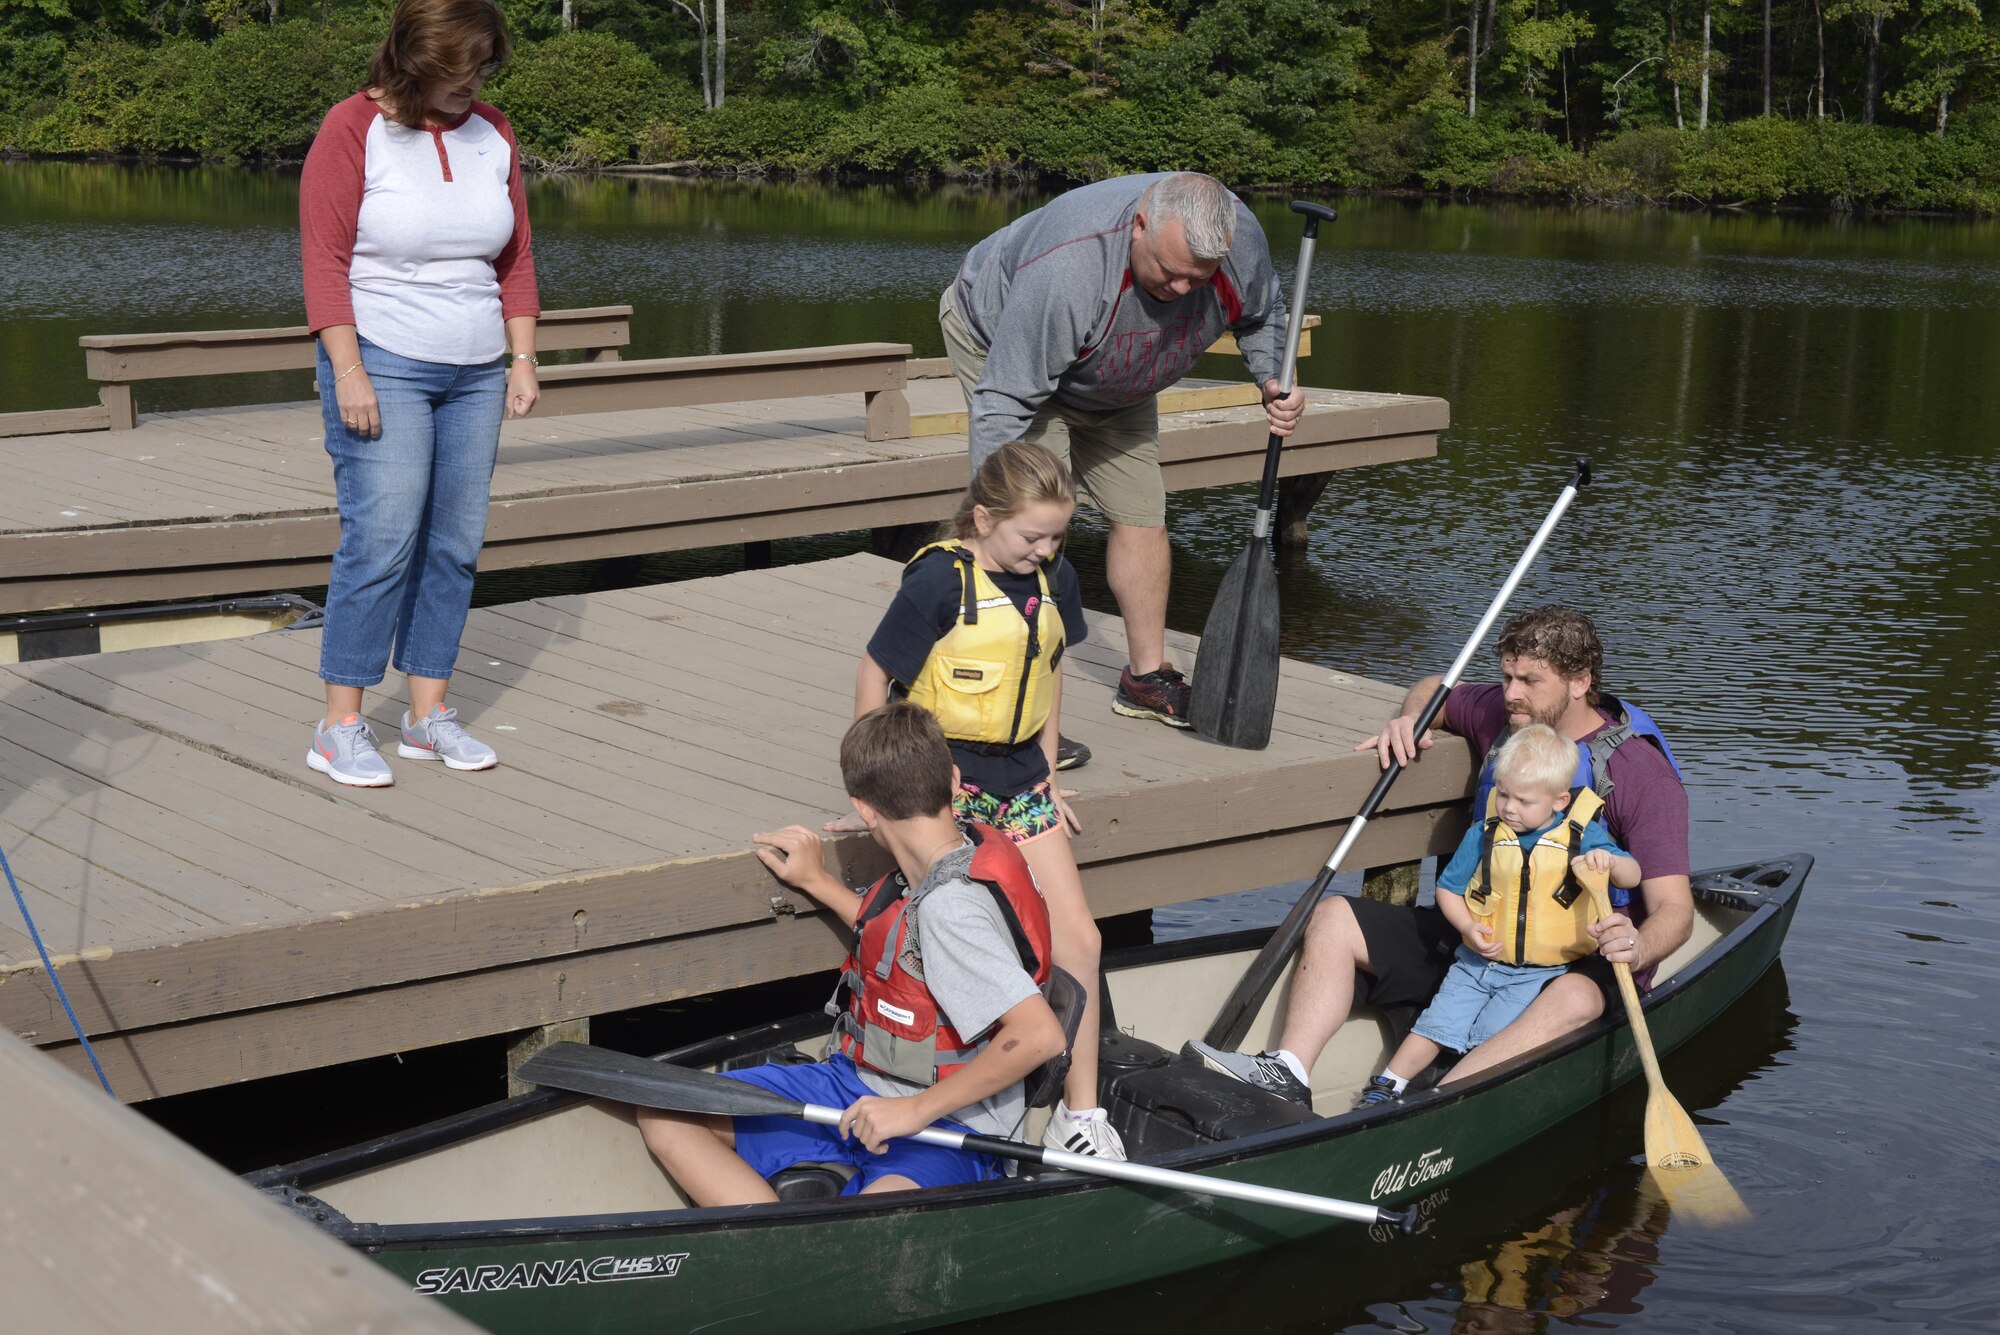 A female and a male on a dock help four people get into a canoe for them to explore the lake.